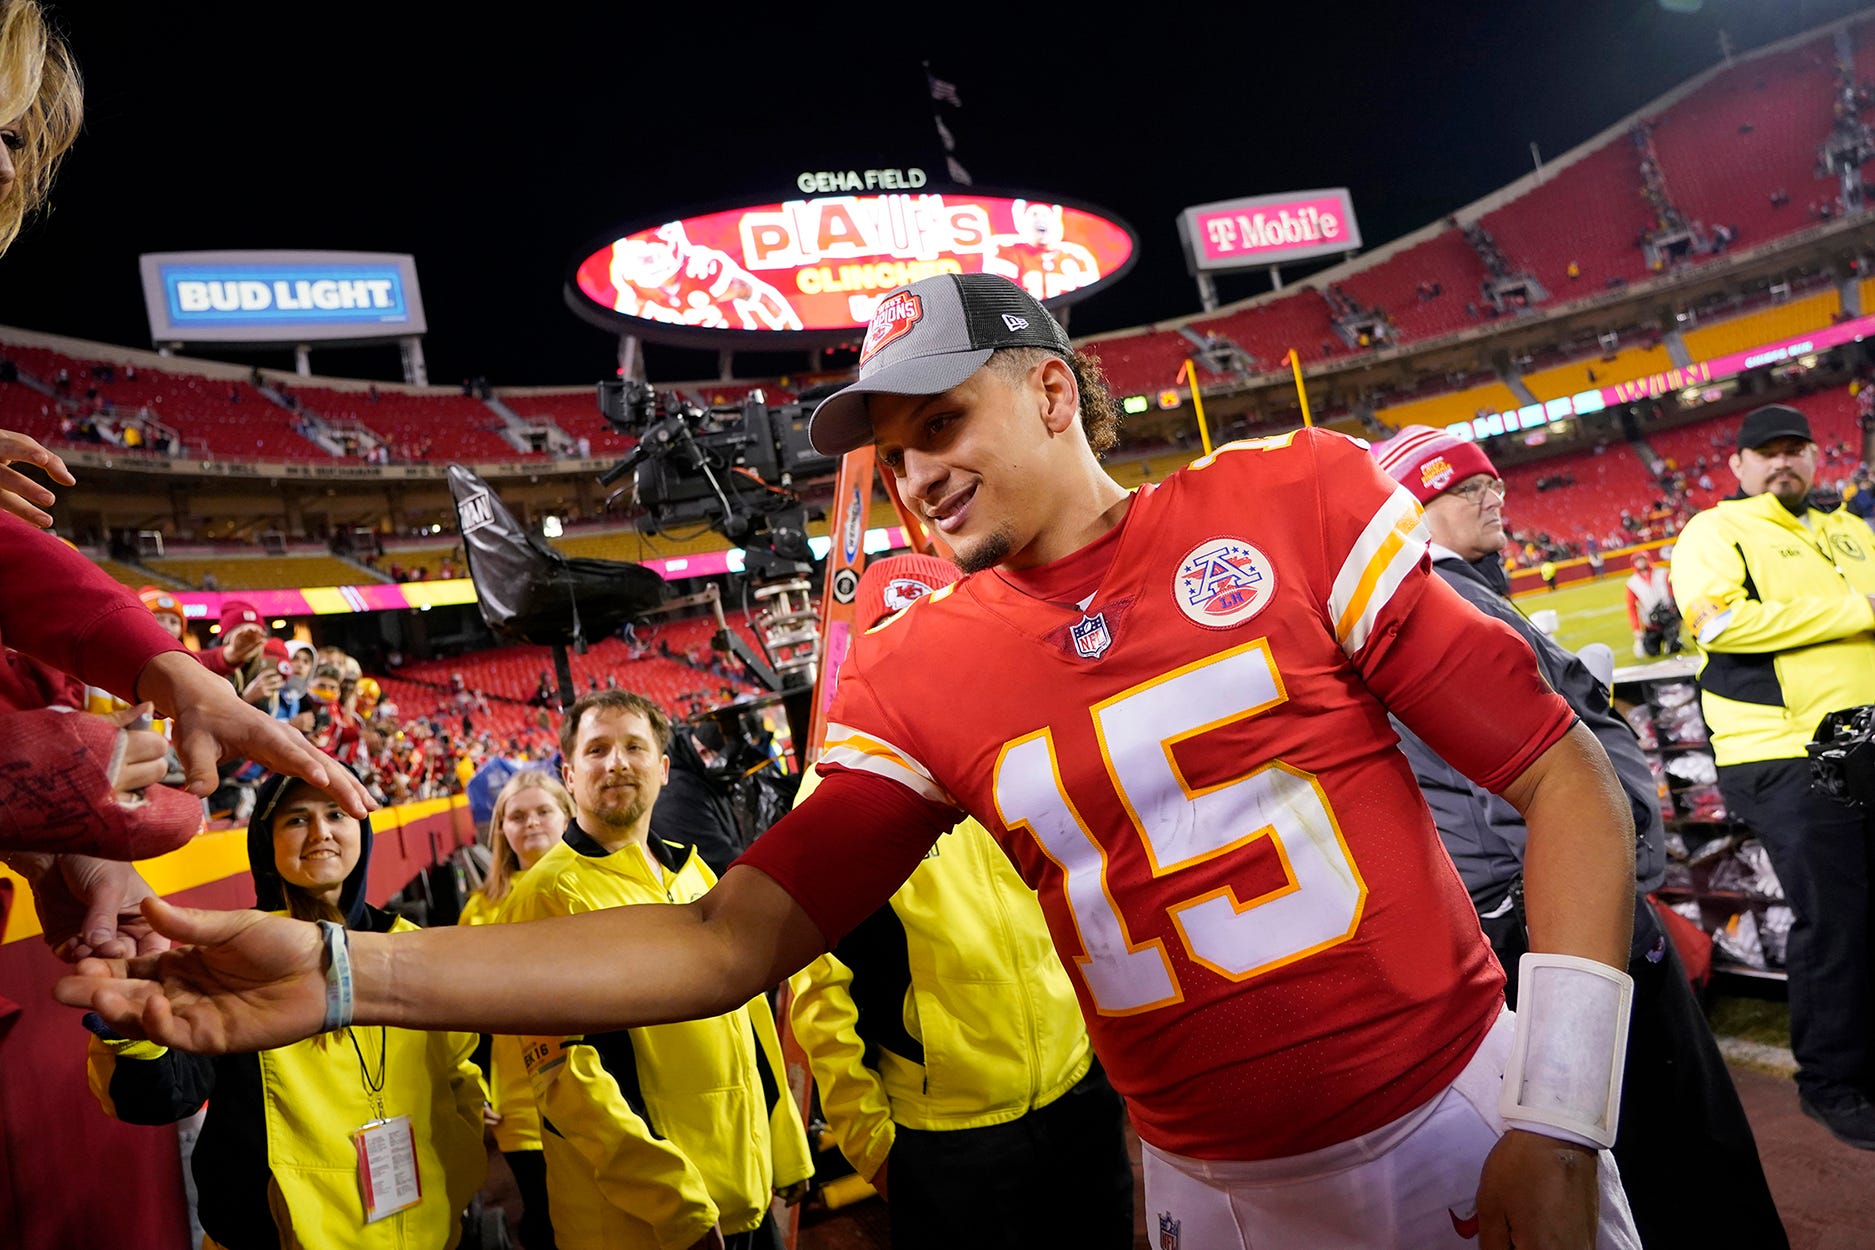 Chiefs to host Bills in high-profile AFC title game rematch